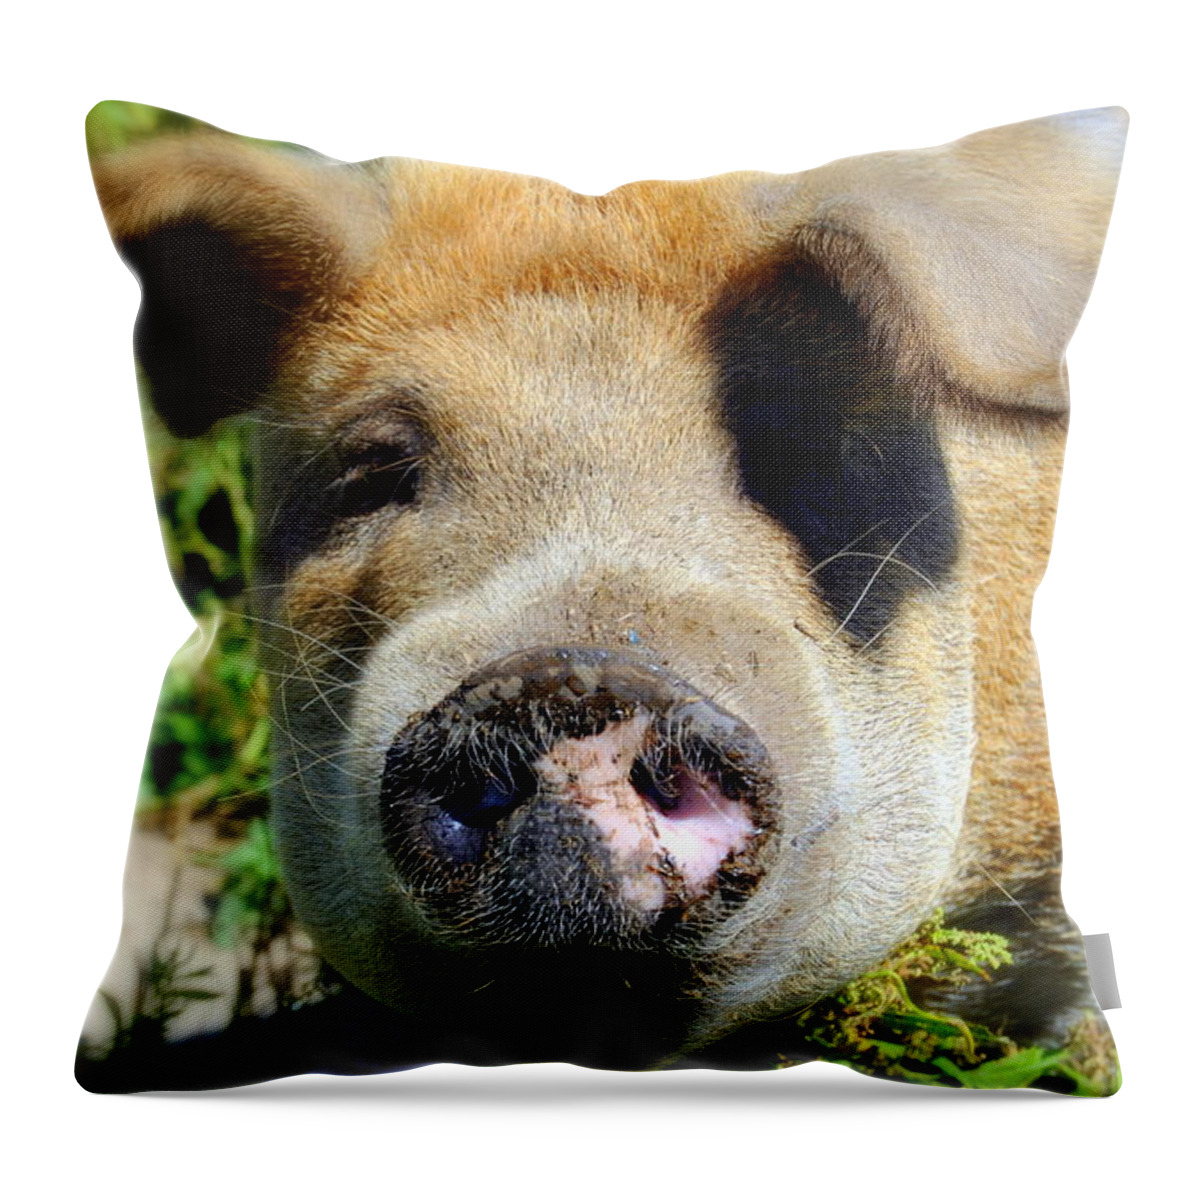 Pig Photos Throw Pillow featuring the photograph The Pig Brown Sugar by Marysue Ryan